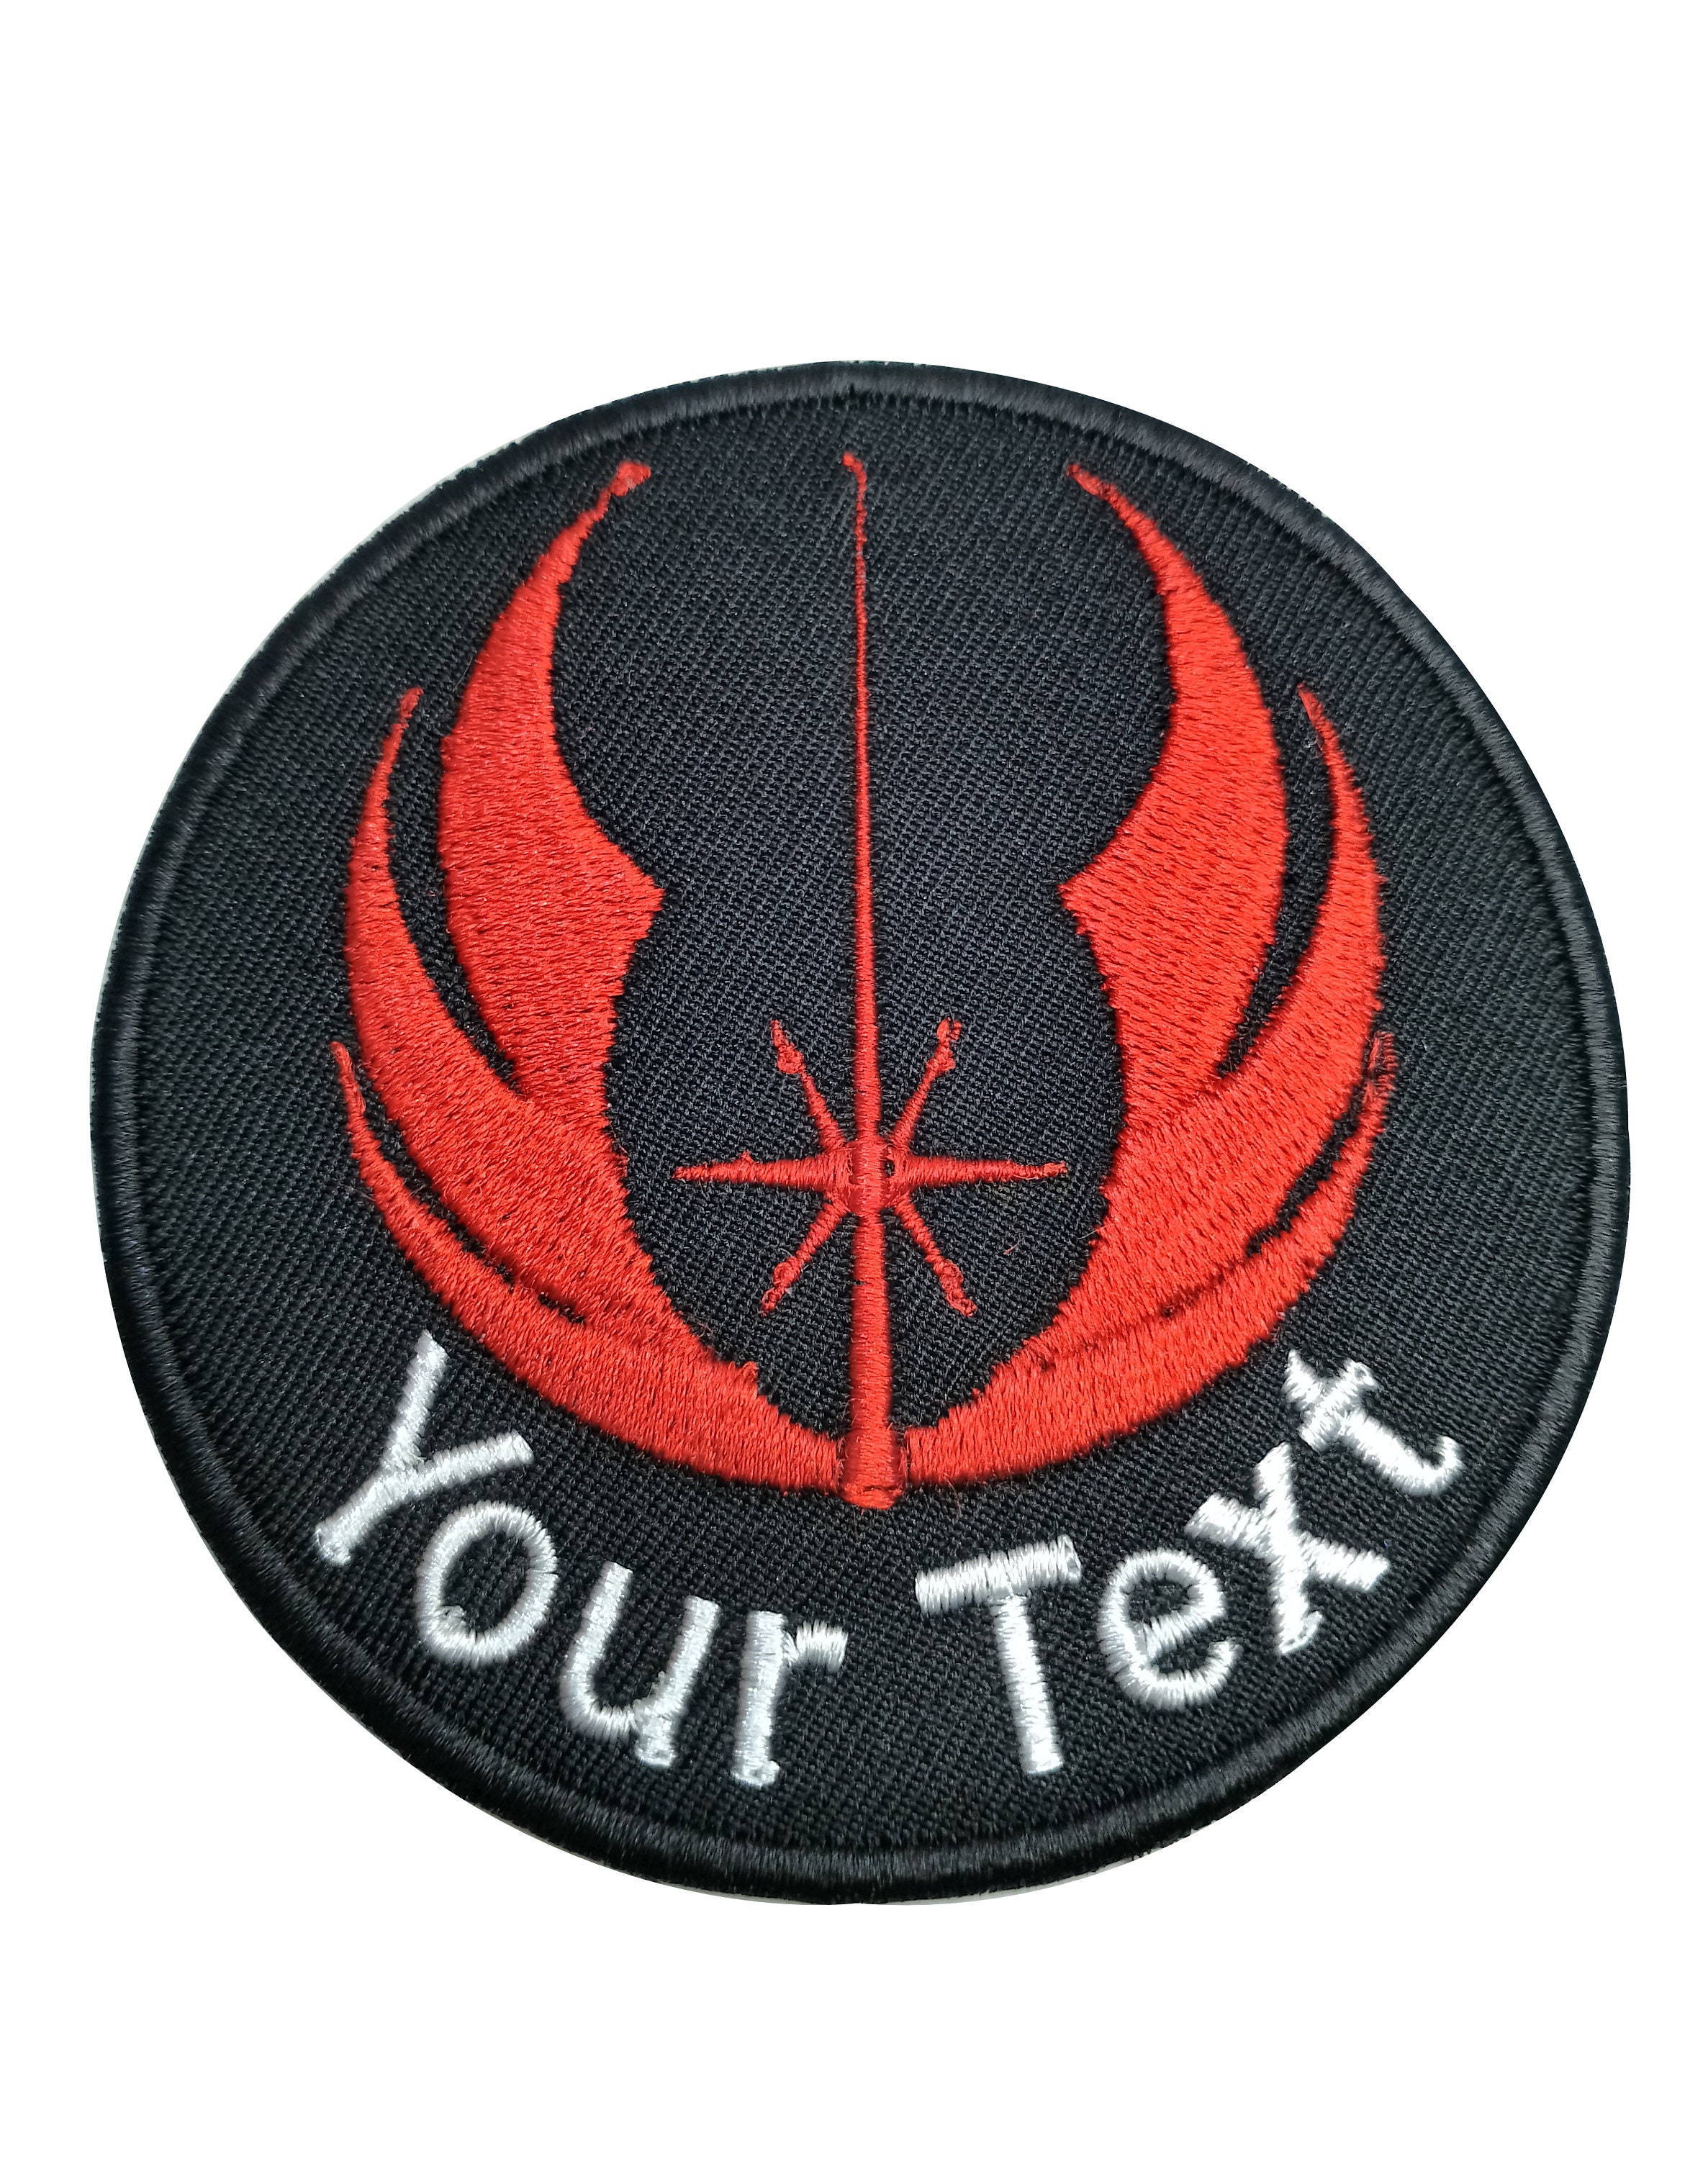 Star Wars inspired Unit Patches : r/army